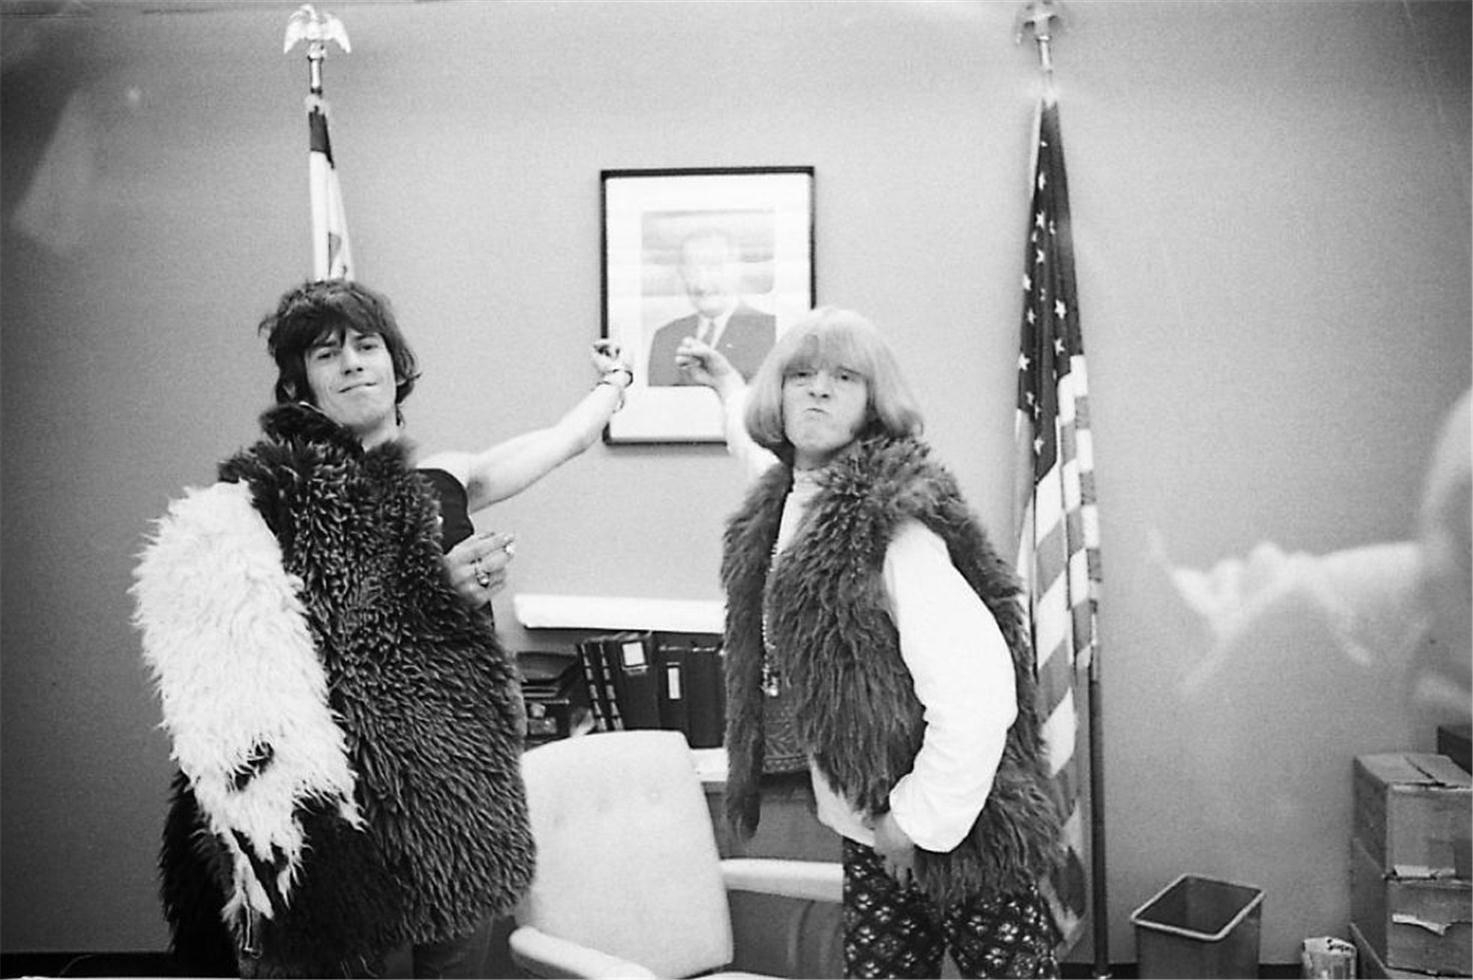 Michael Cooper (b.1941) Black and White Photograph - Keith Richards & Brian Jones, US Embassy in London